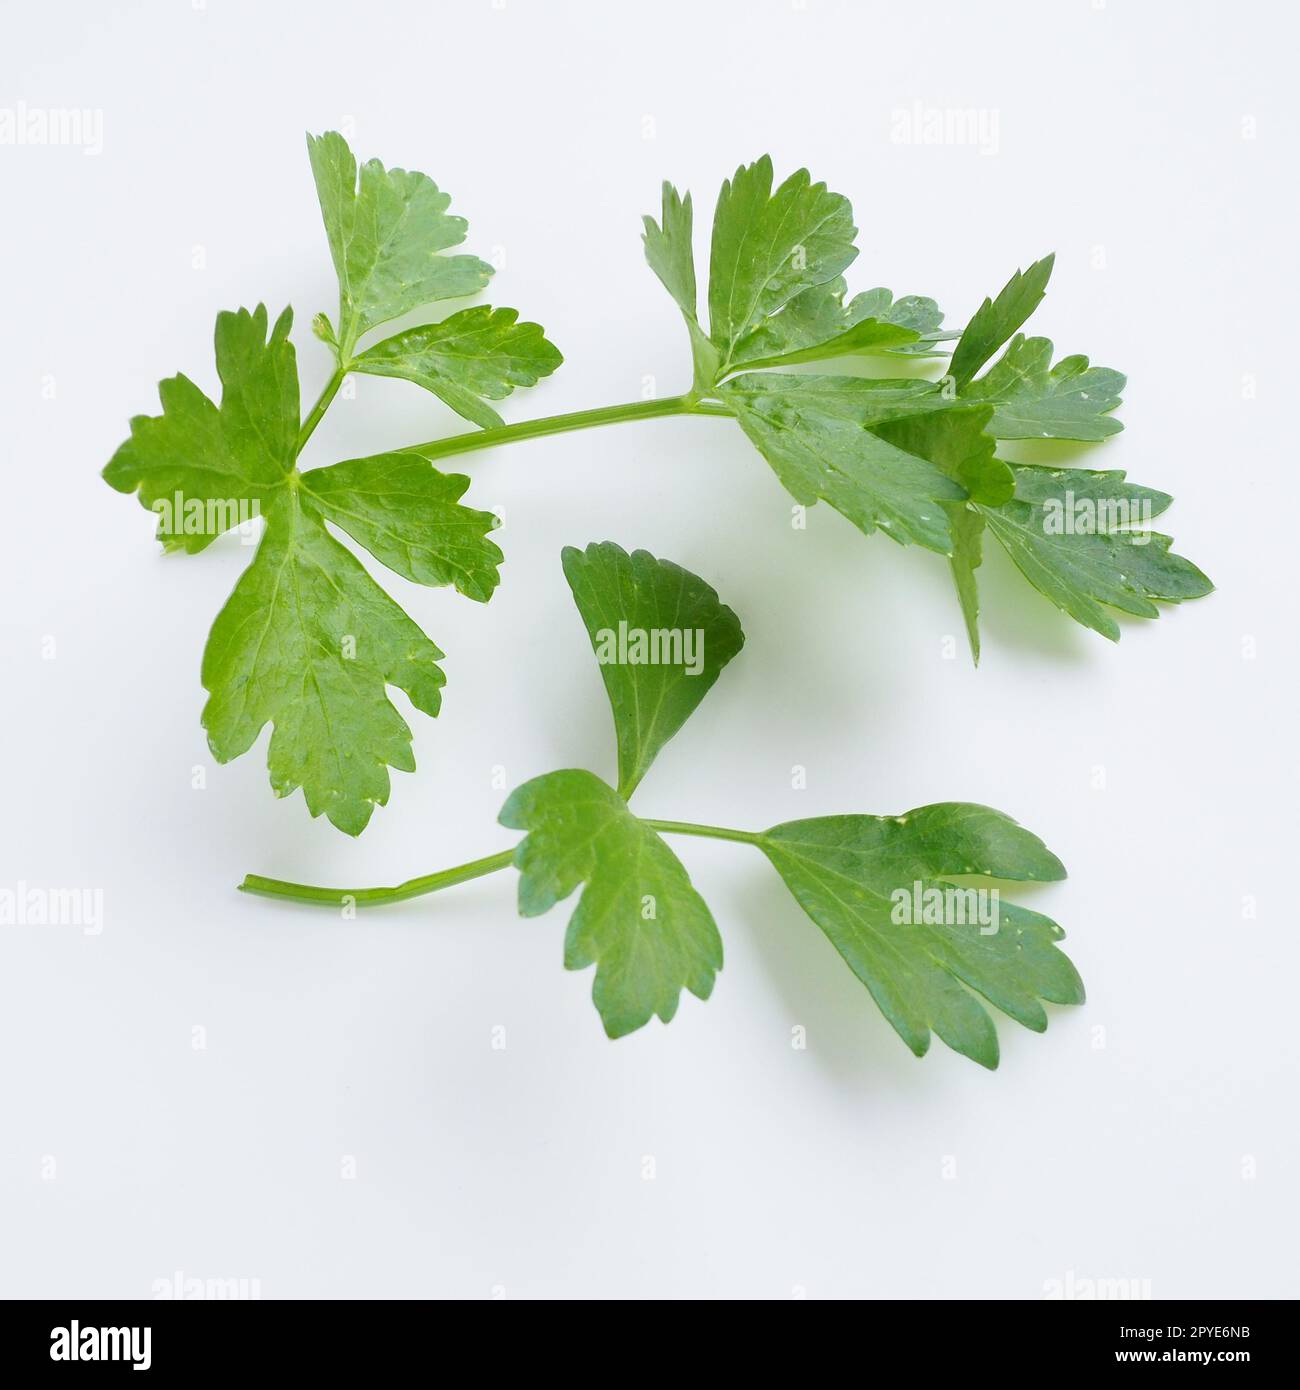 Petroselinum crispum, one- to two-year-old plant umbrella family Umbelliferae. Celery odorous, or Celery fragrant Apium graveolens is a biennial plant Apiaceae, a vegetable crop. White background. Stock Photo